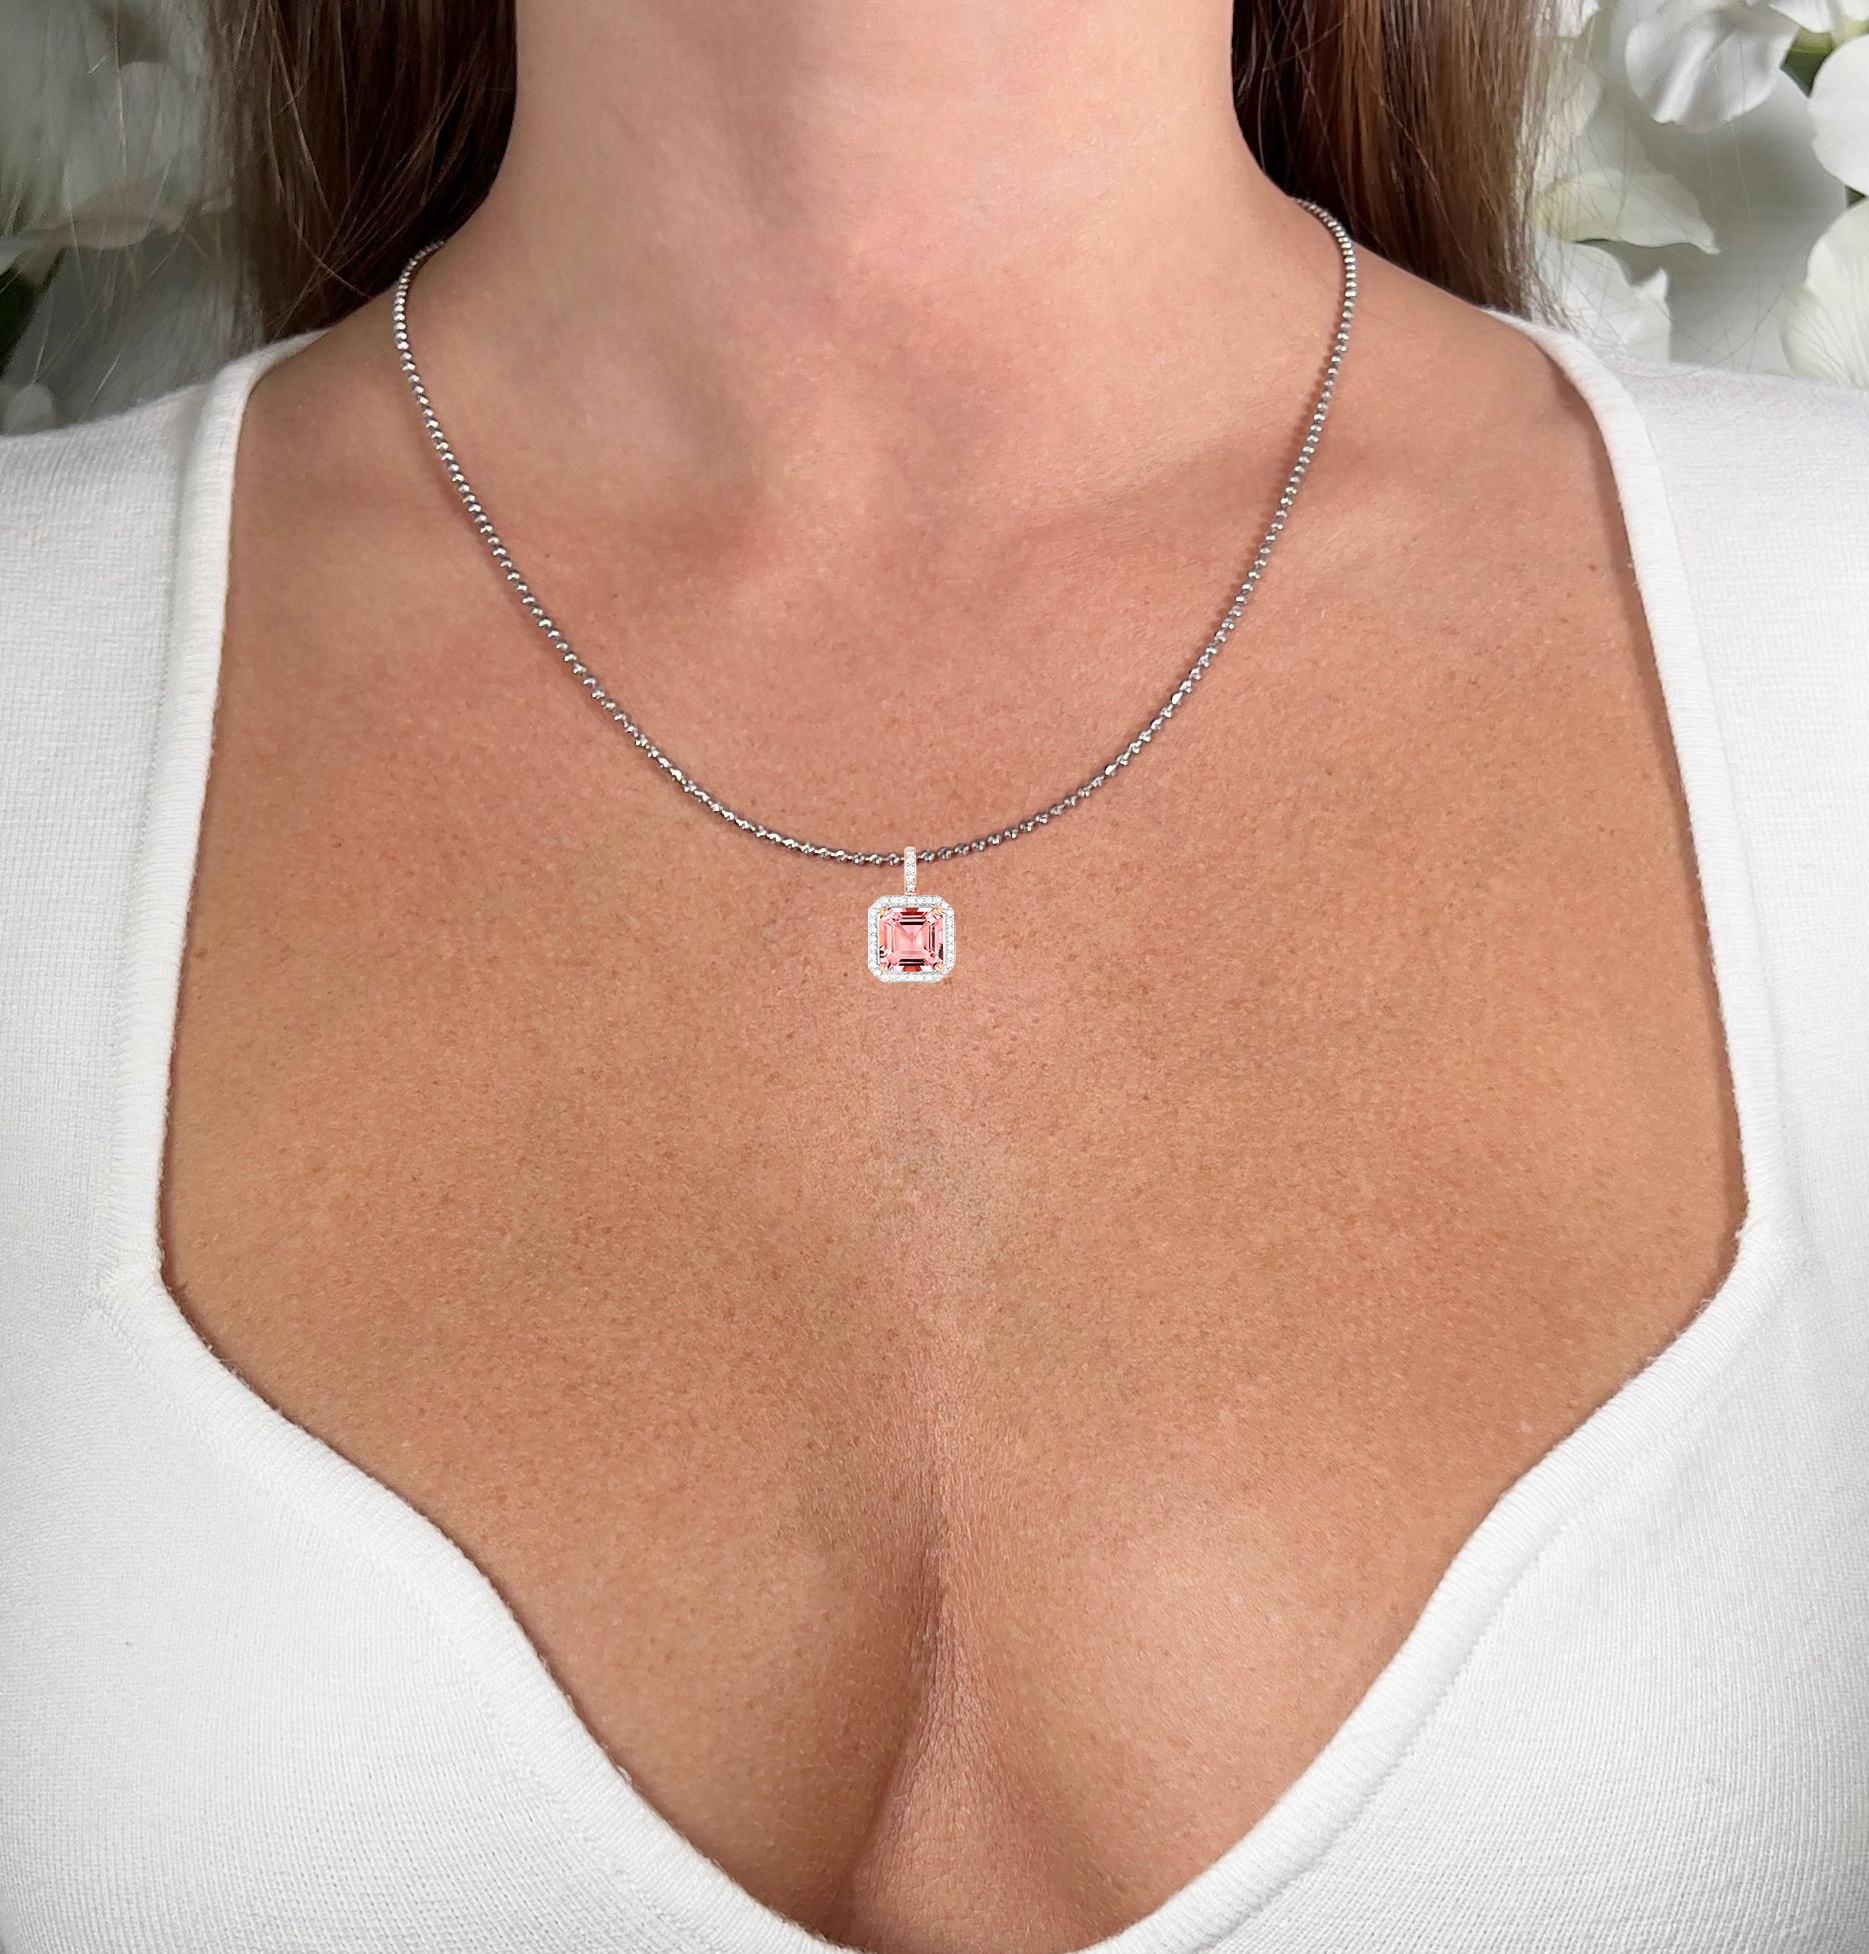 It comes with the Gemological Appraisal by GIA GG/AJP
All Gemstones are Natural
Morganite = 2.20 Carats
37 Diamonds = 0.18 Carats
Metal: 14K Rose Gold
Pendant Dimensions: 17 x 11 mm